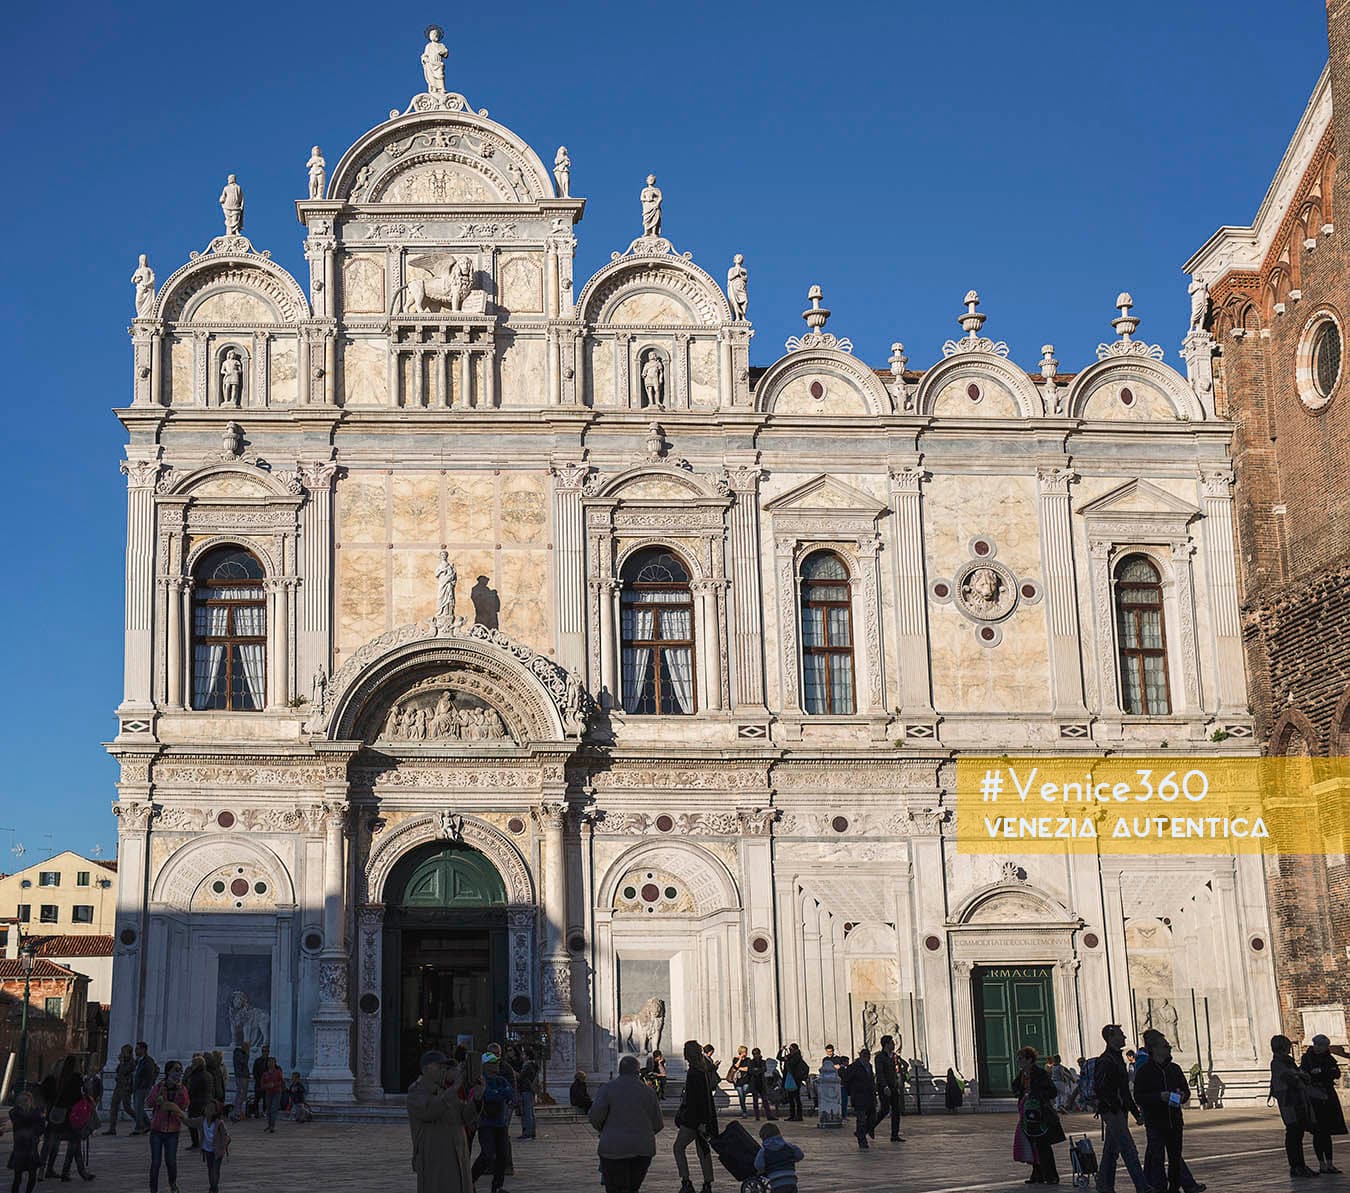 The Scuola Grande di San Marco in Venice, in the district of Castello. The facade shows classic renaissance and byzantine styles, ornamented with arches, niches, statues and light marbles.